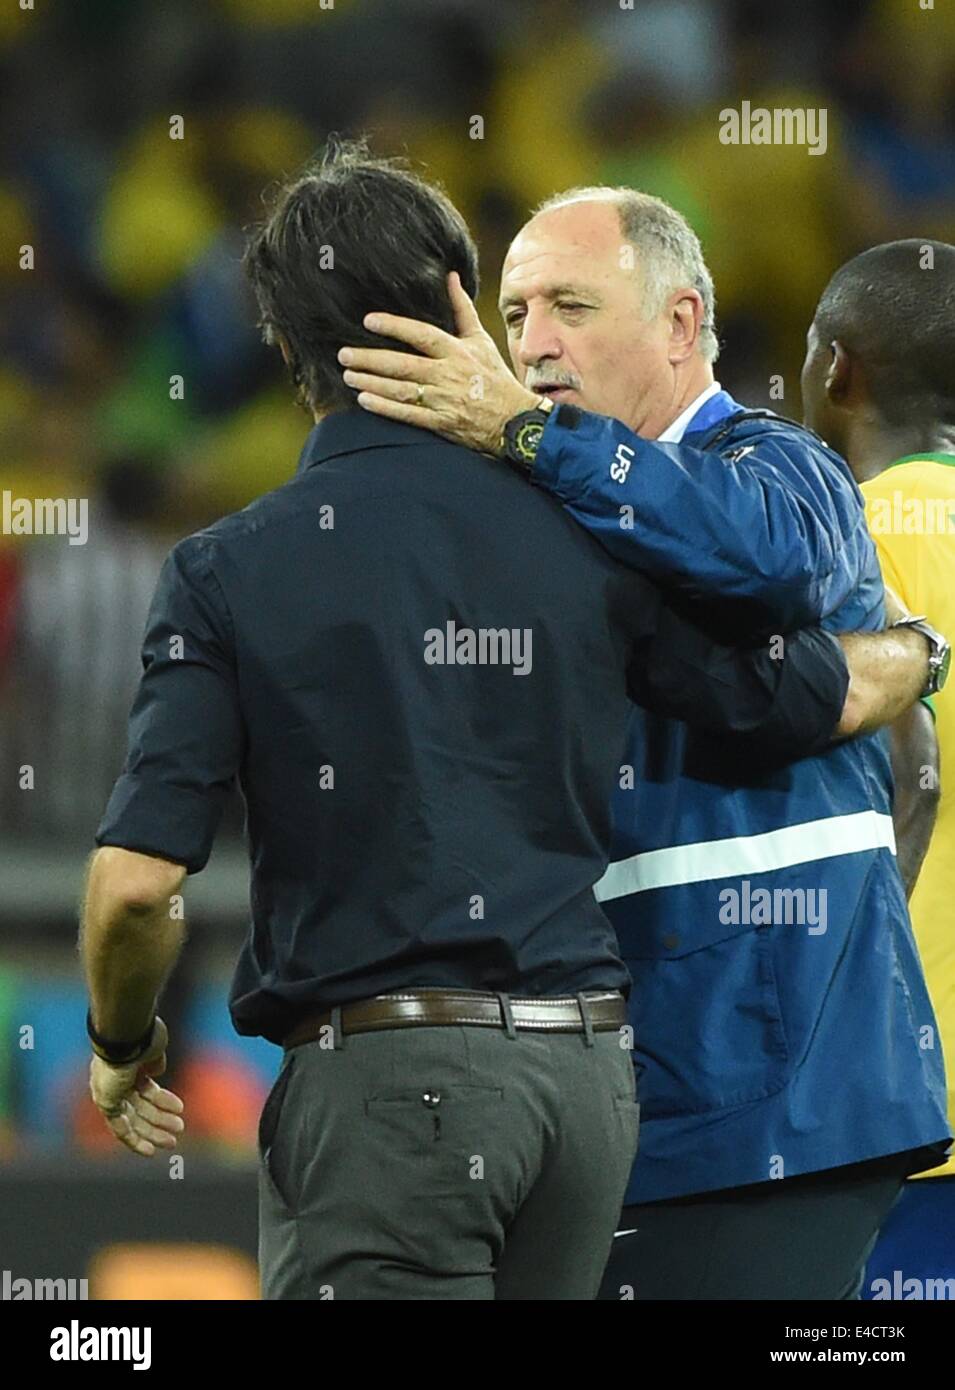 Belo Horizonte, Brazil. 8th July, 2014. Brazil's coach Luiz Felipe Scolari (C) greets Germany's coach Joachim Loew after a semifinal match between Brazil and Germany of 2014 FIFA World Cup at the Estadio Mineirao Stadium in Belo Horizonte, Brazil, on July 8, 2014. Germany won 7-1 over Brazil and qualified for the final on Tuesday. Credit:  Liu Dawei/Xinhua/Alamy Live News Stock Photo